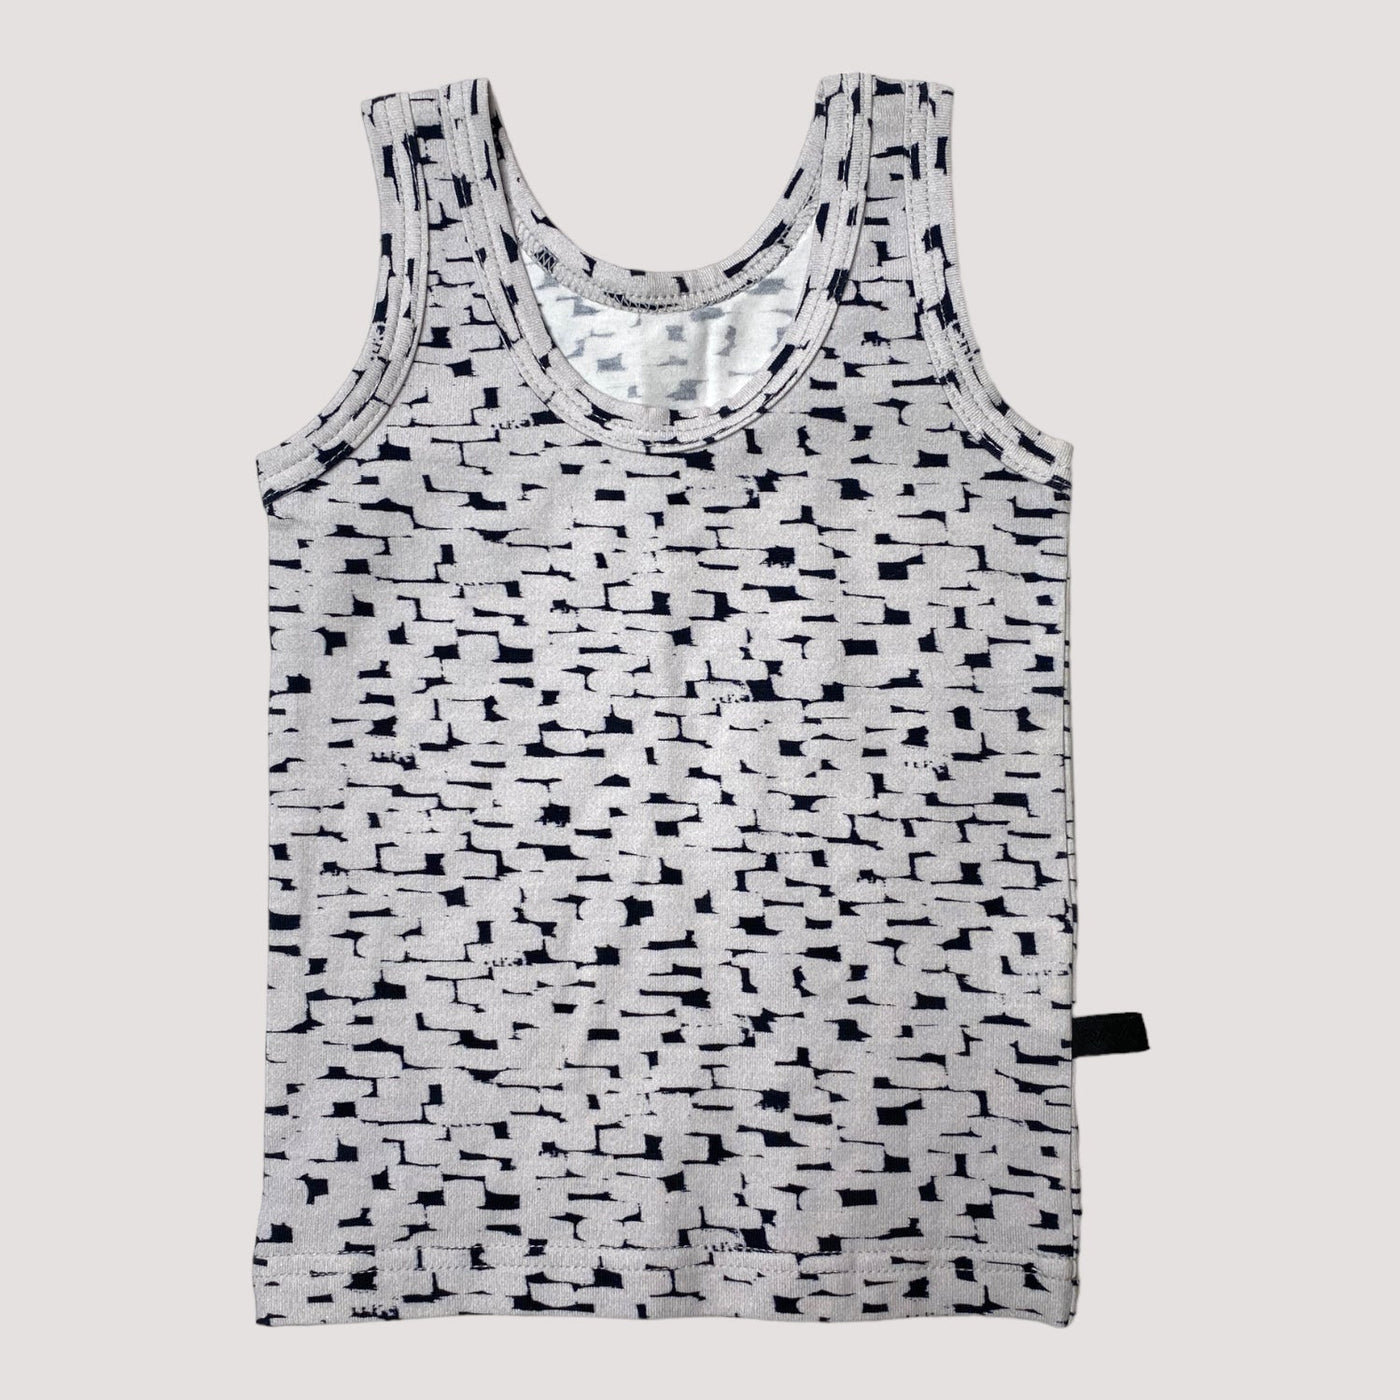 Vimma tank top, graphical | 80cm